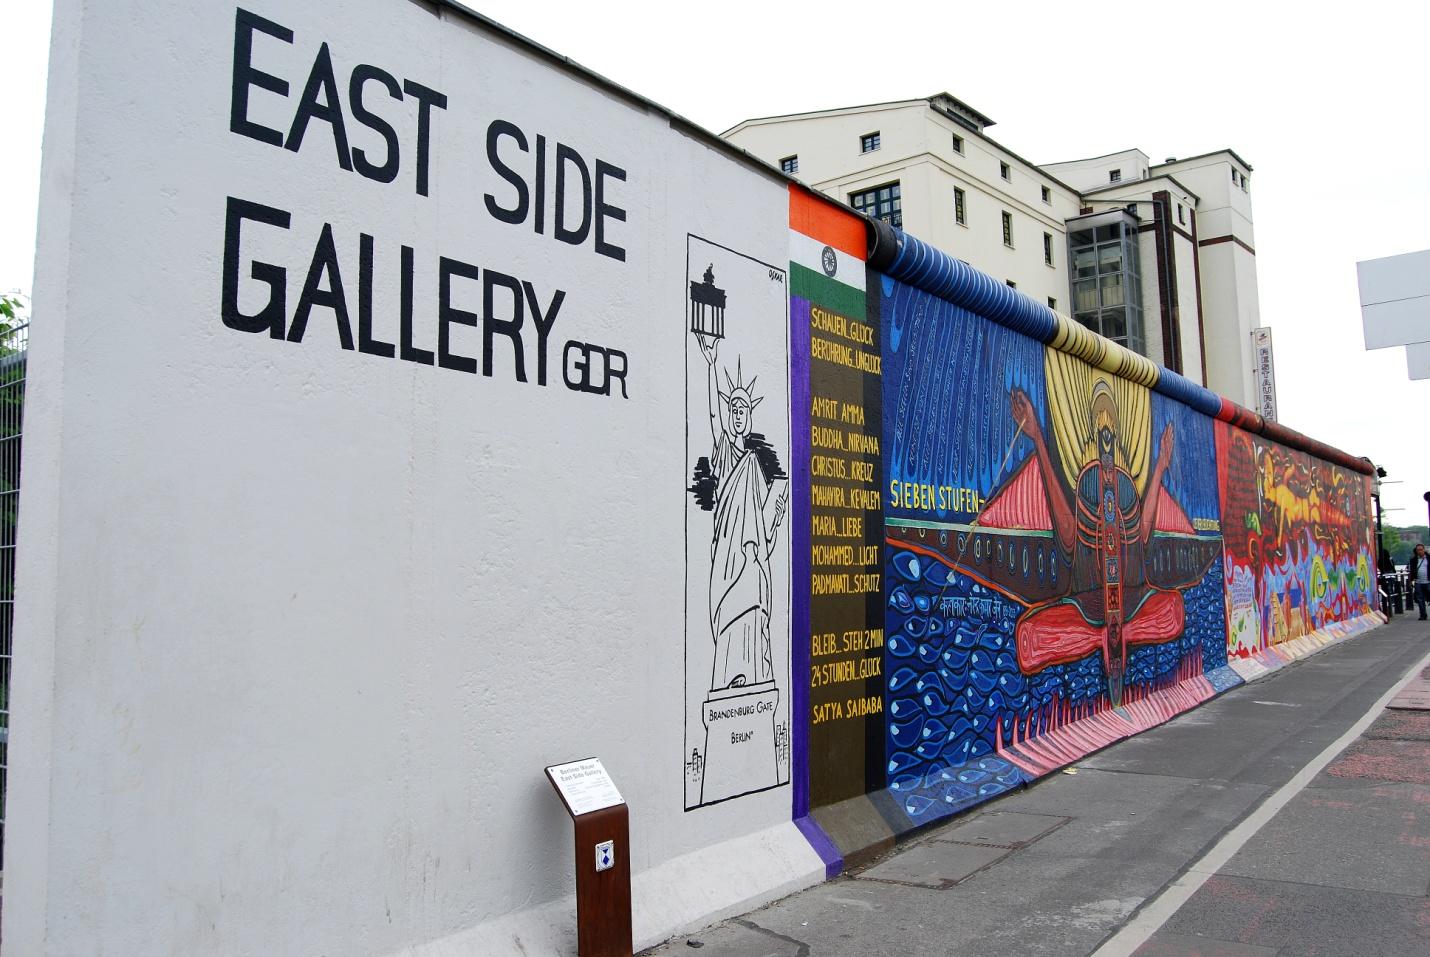 The East Side Gallery: Annihilation and Preservation of the Past